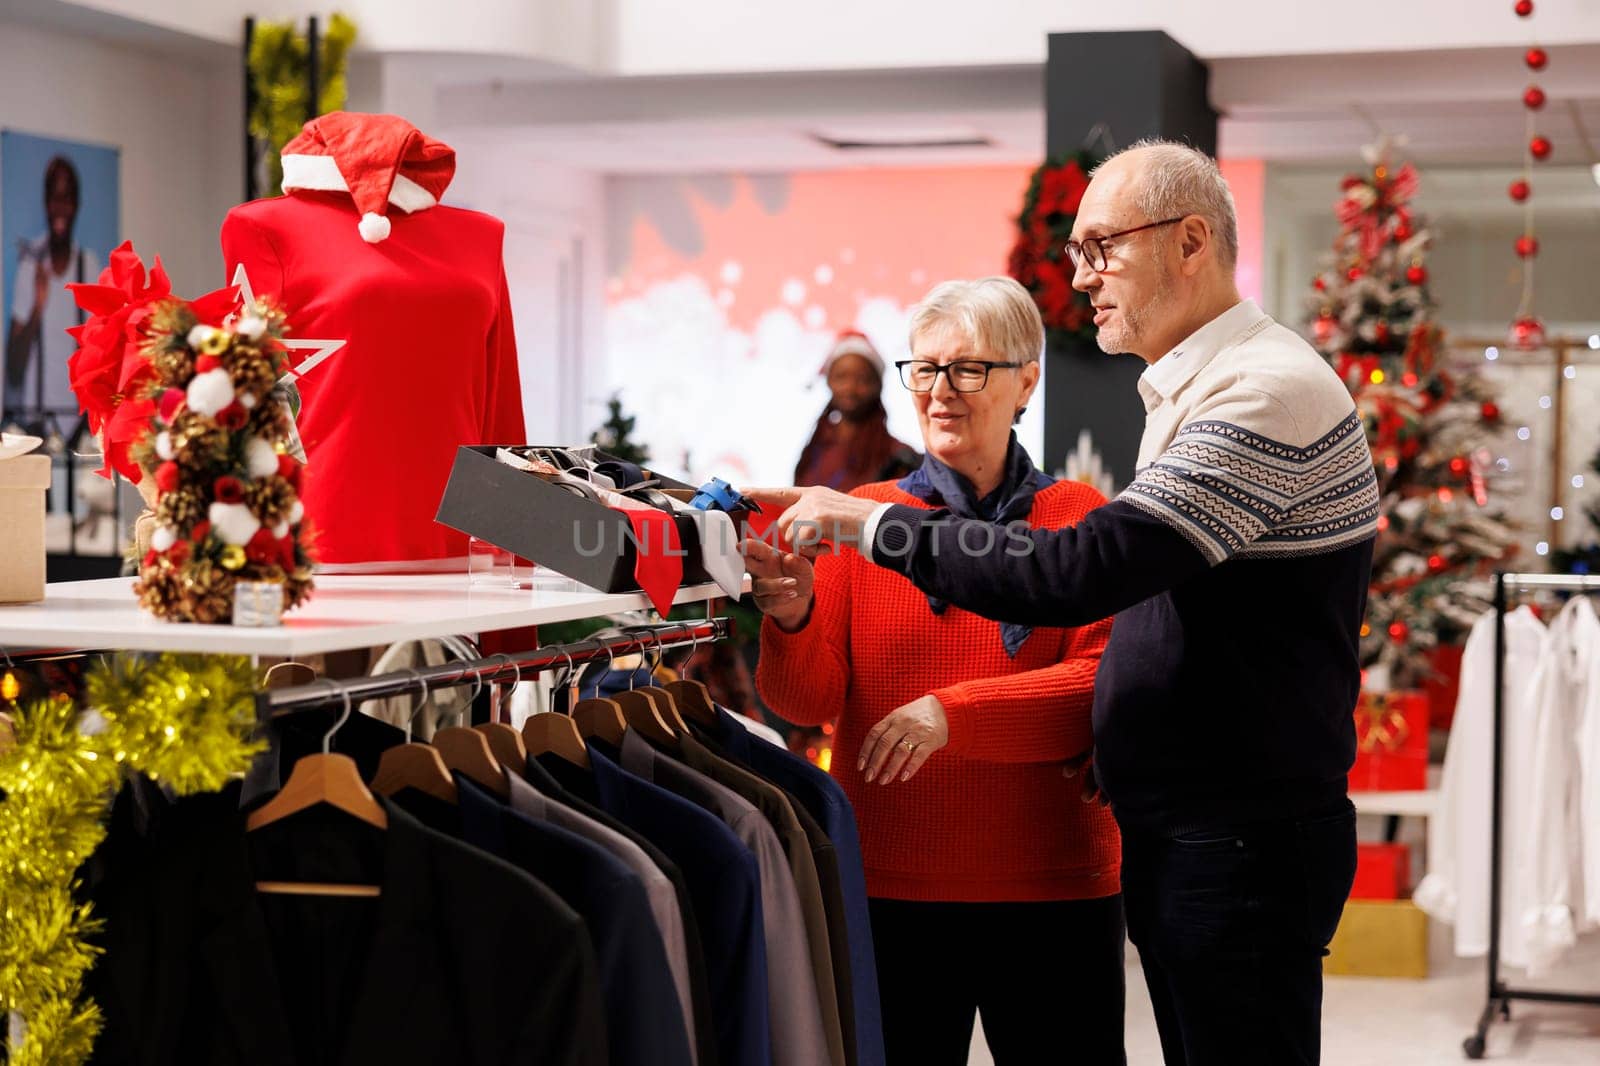 Old customers checking belts and ties in clothing store, looking at accessories to match formal attire for christmas eve dinner outfit. Senior couple searching for clothes during winter sales.